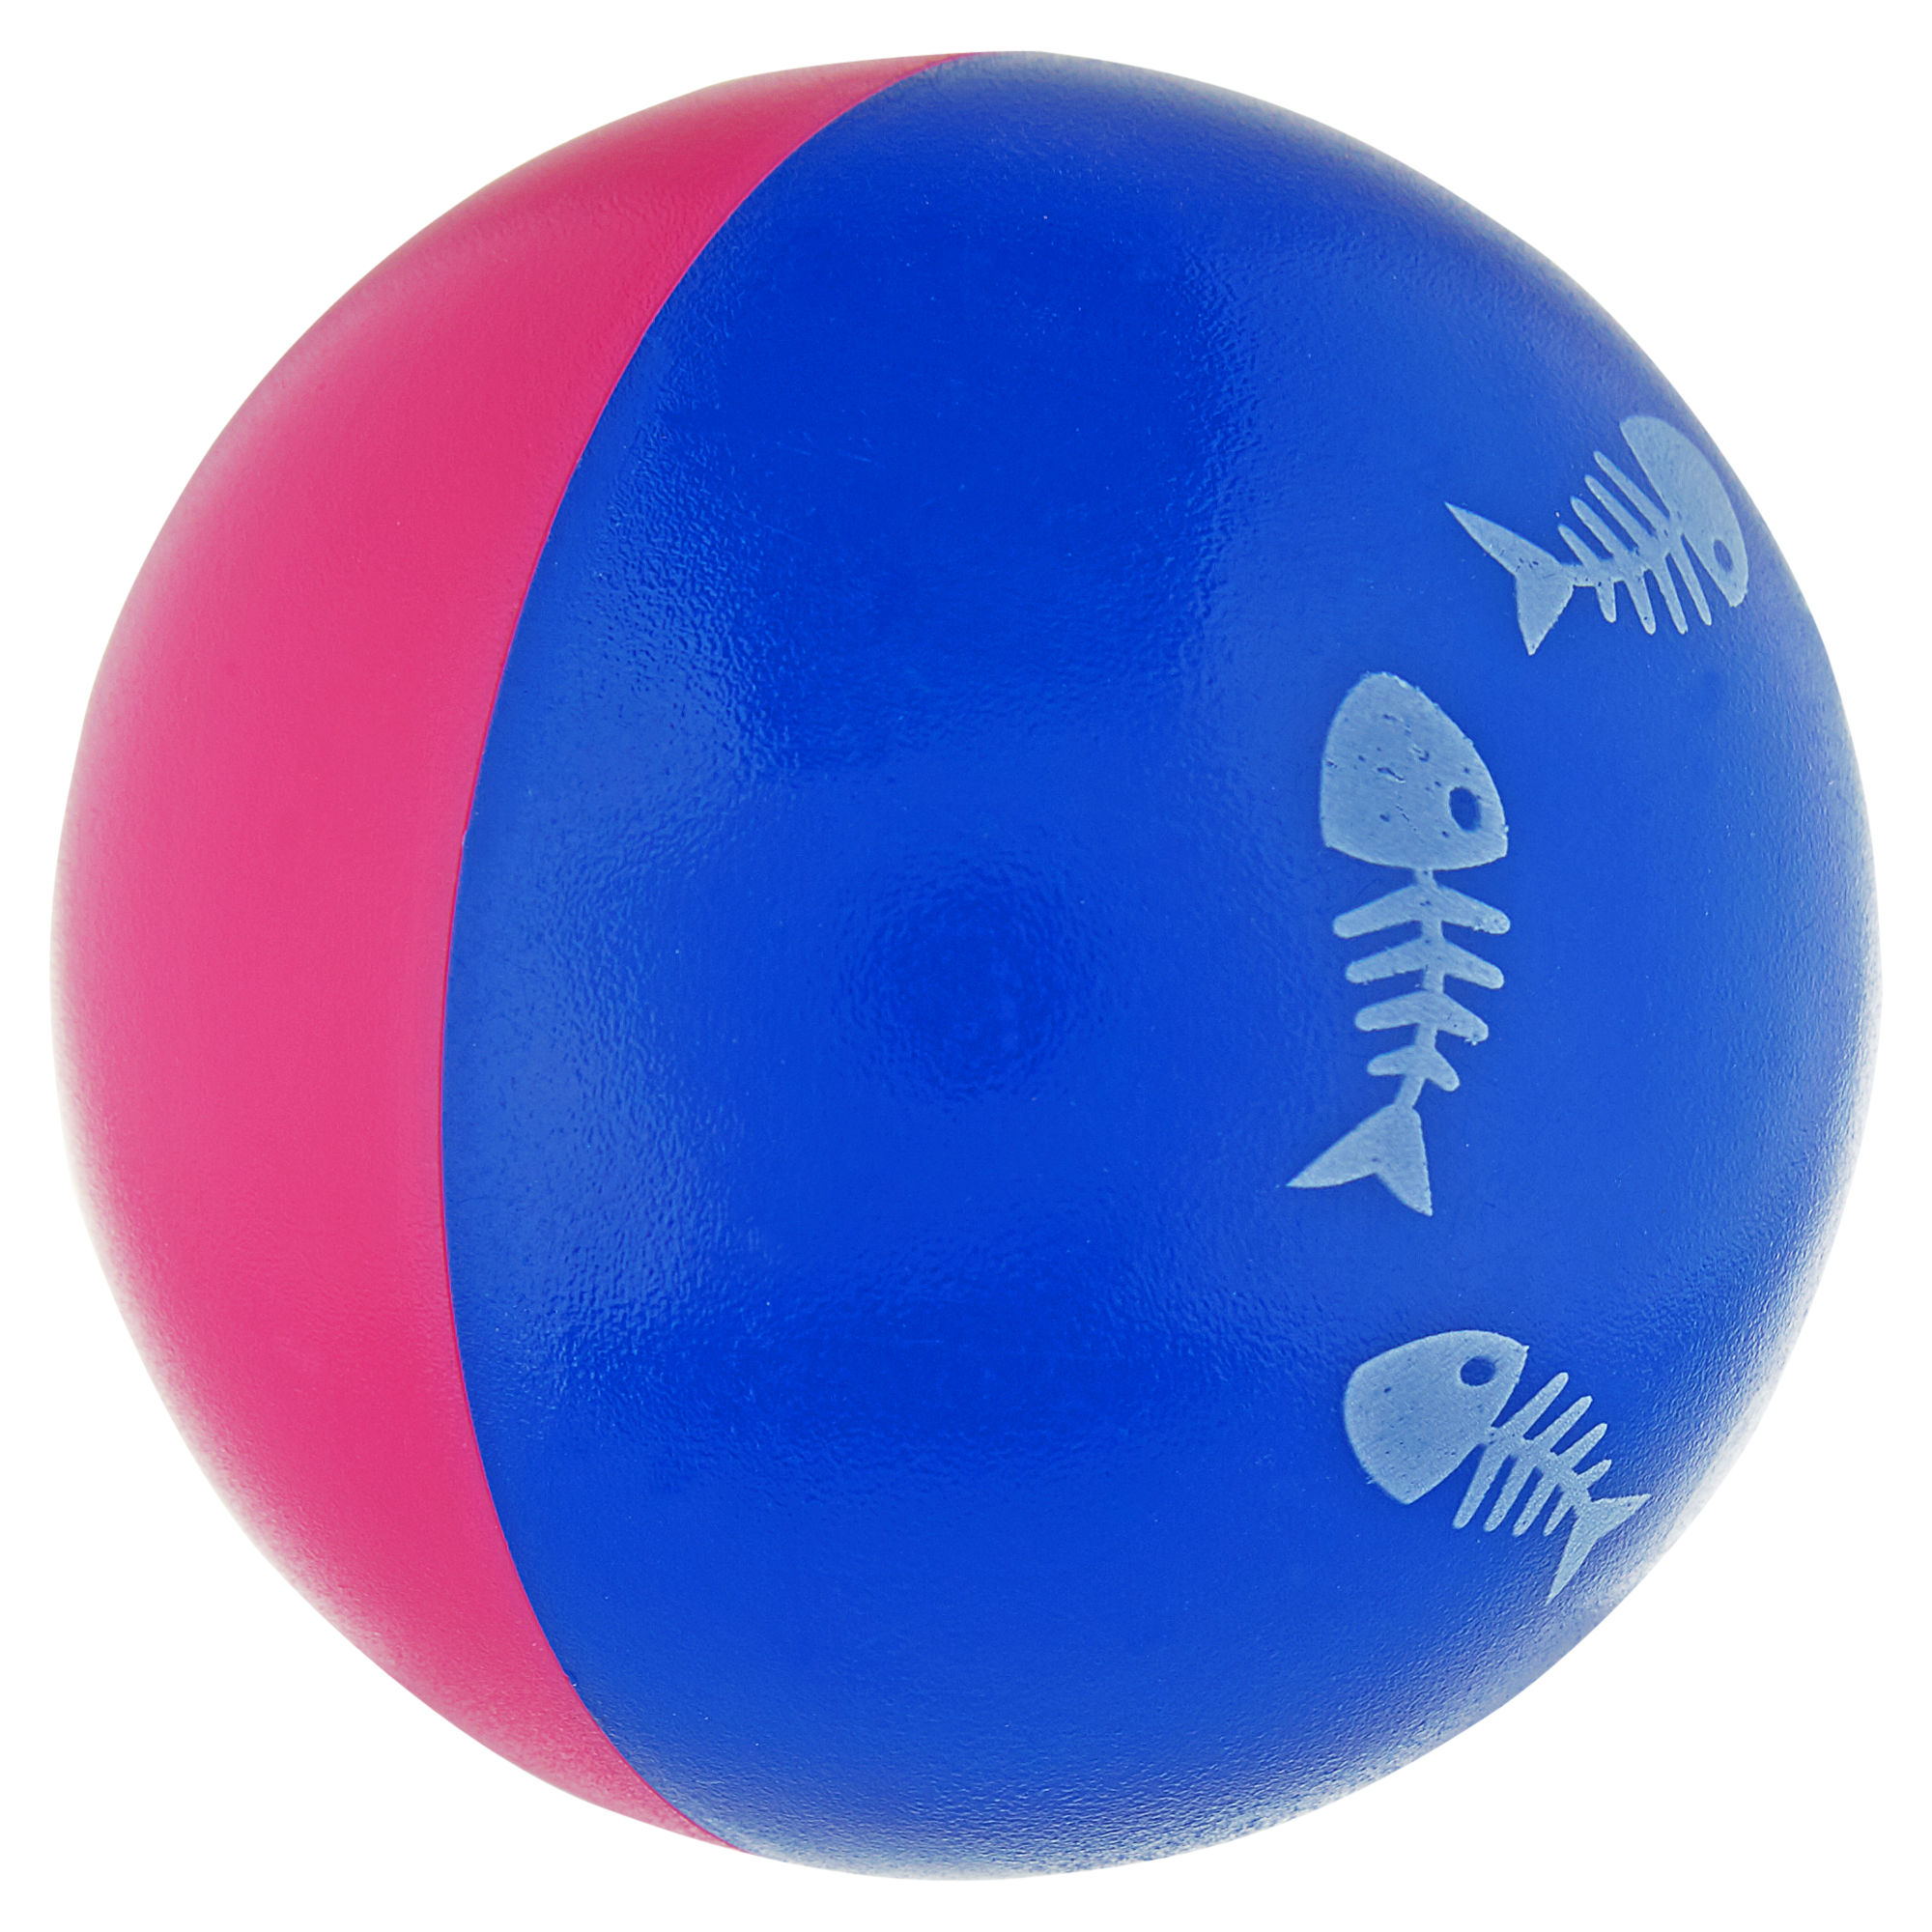 Spielball "Magic Ball" Kunststoff blau/pink Ø 5,5 cm + product picture